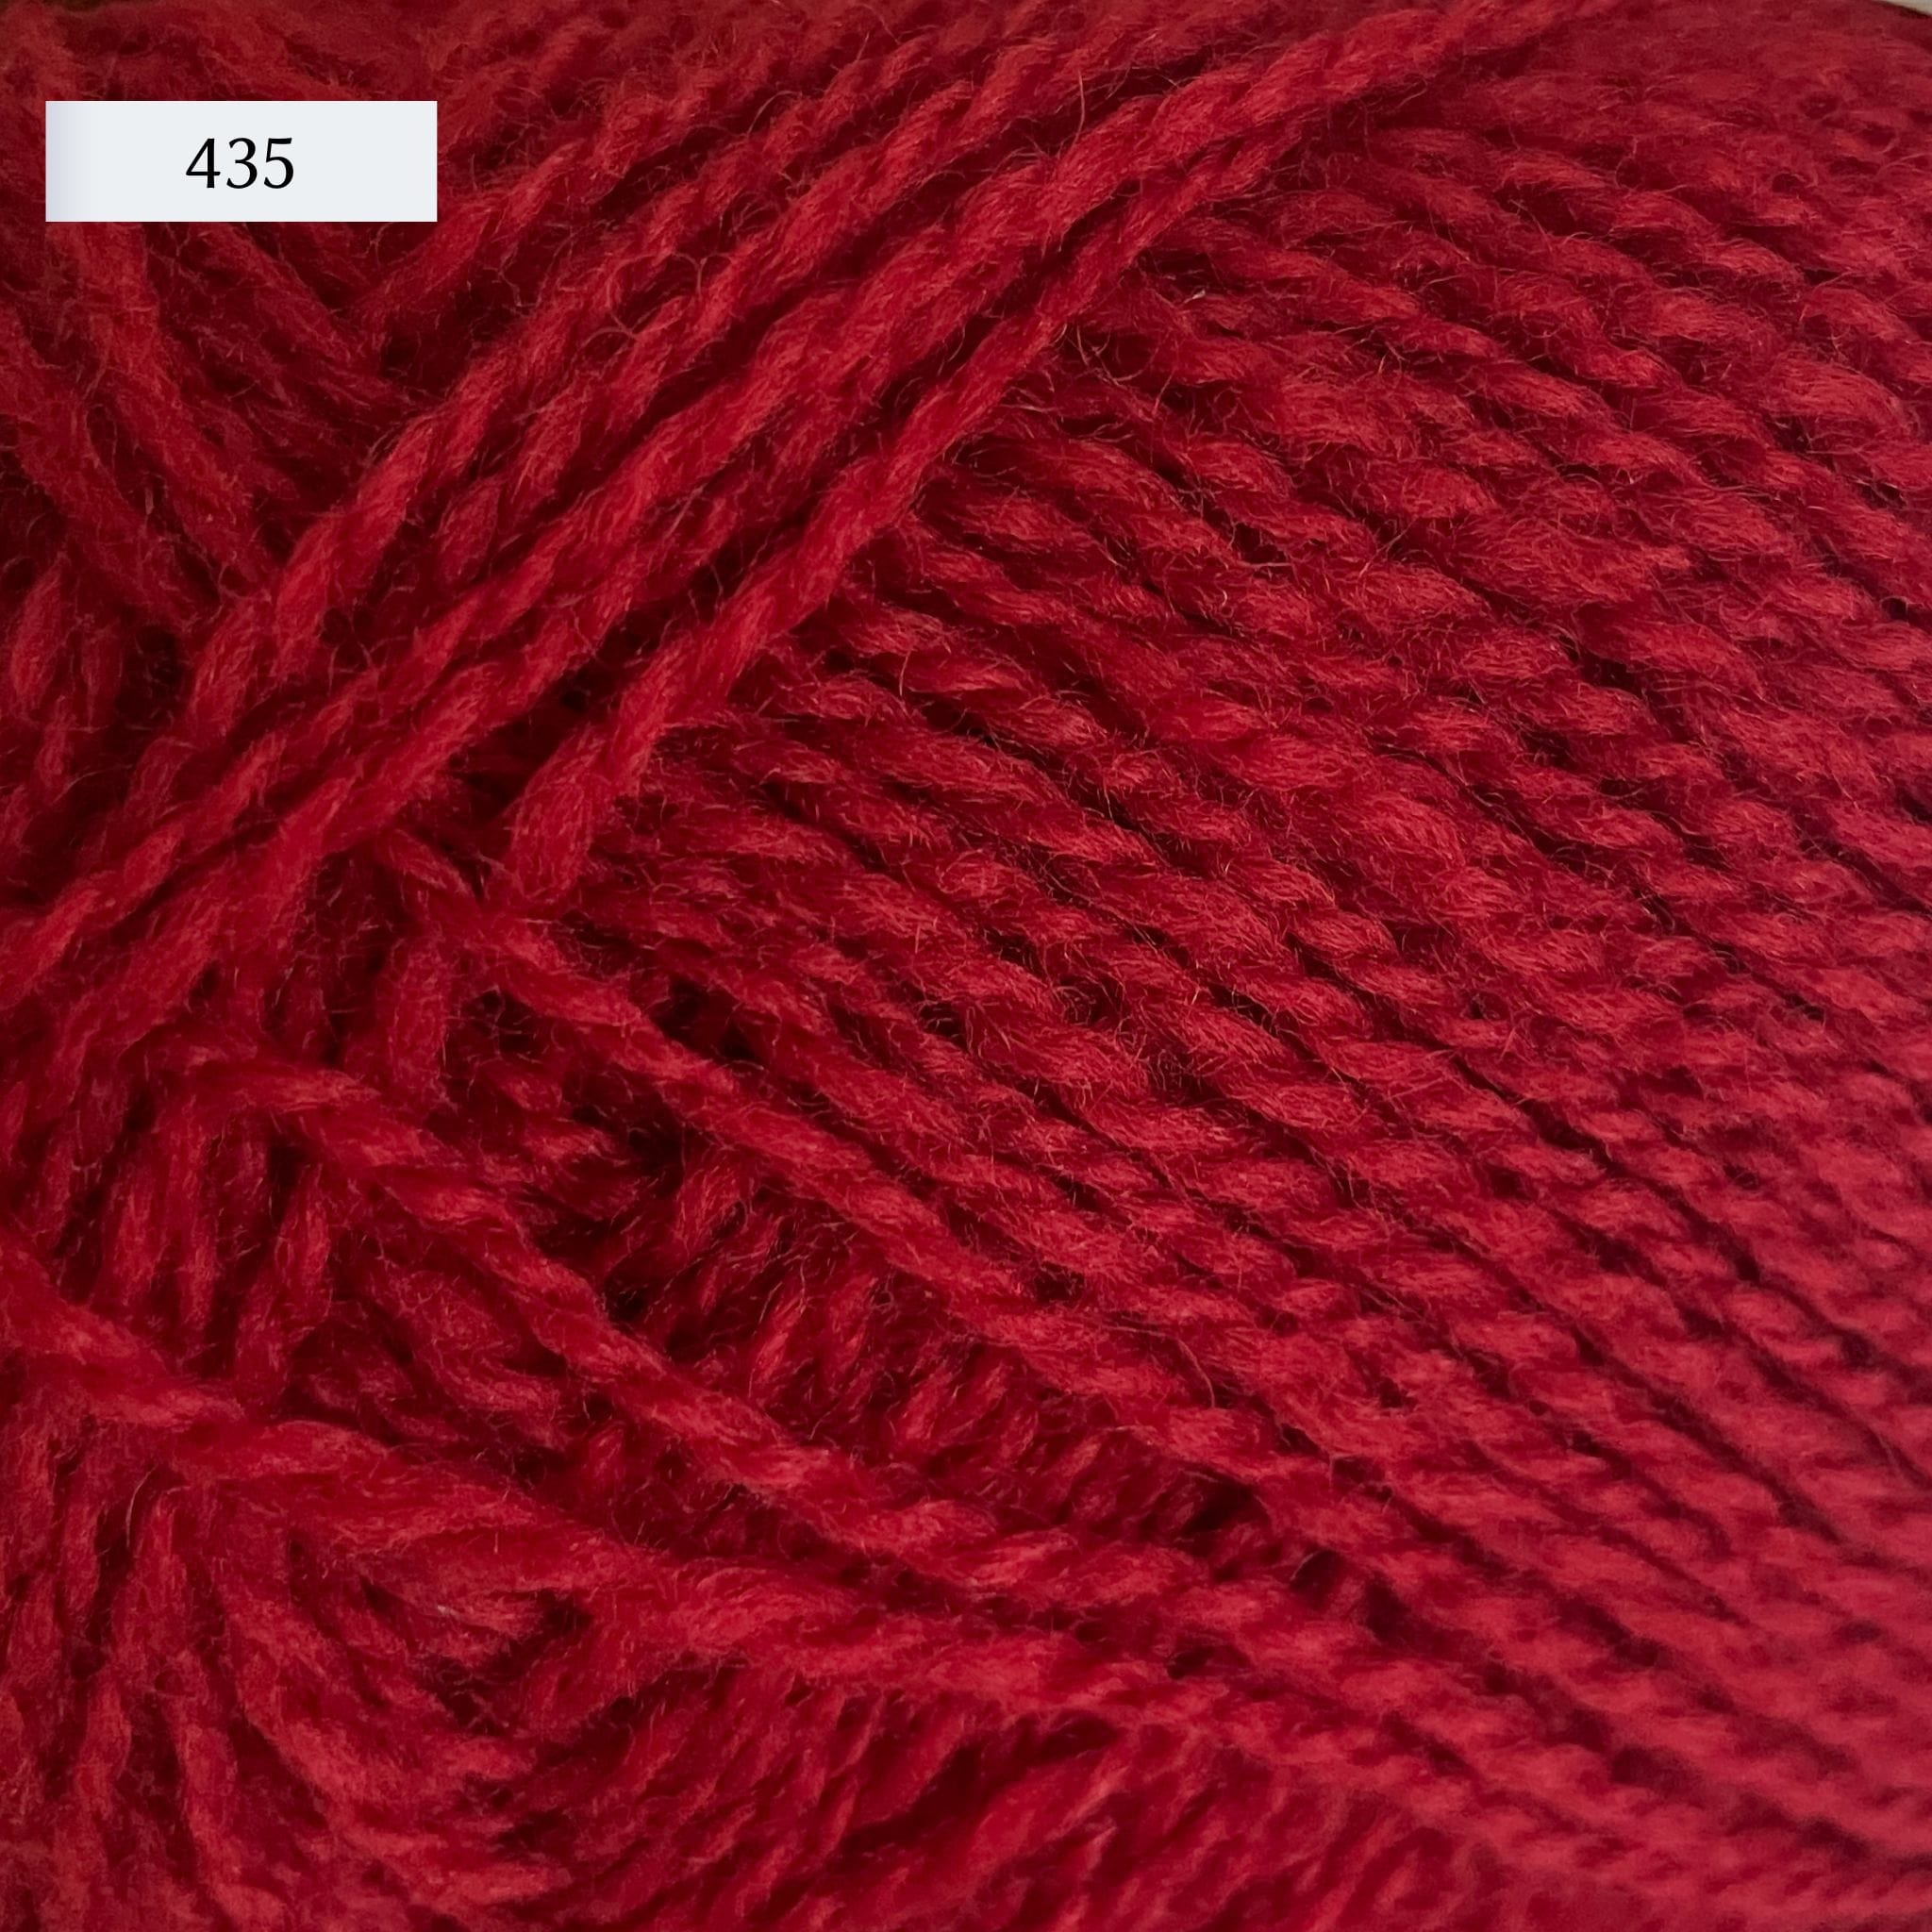 Rauma Finullgarn, a fingering/sport weight yarn, in color 435, a primary red